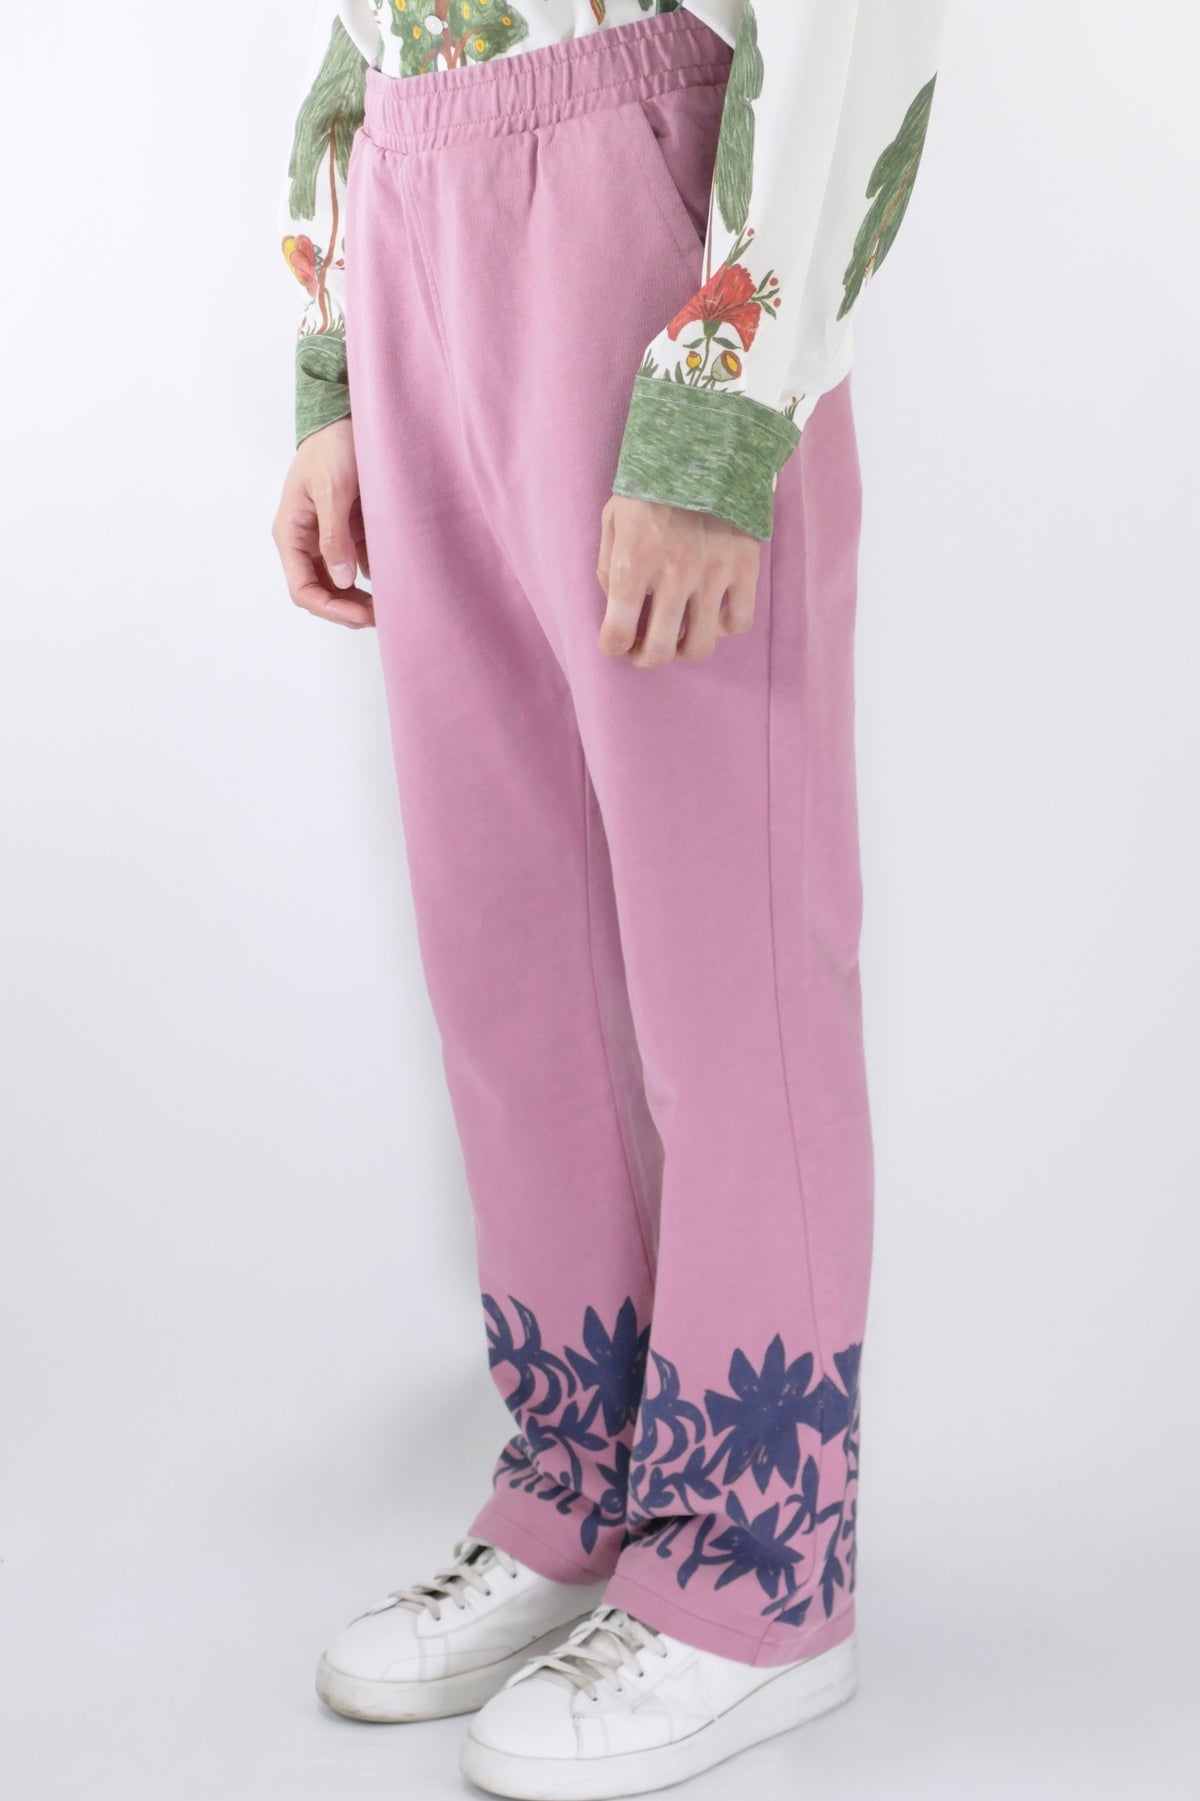 Carne Bollente In the Bush Pant - Washed Pink